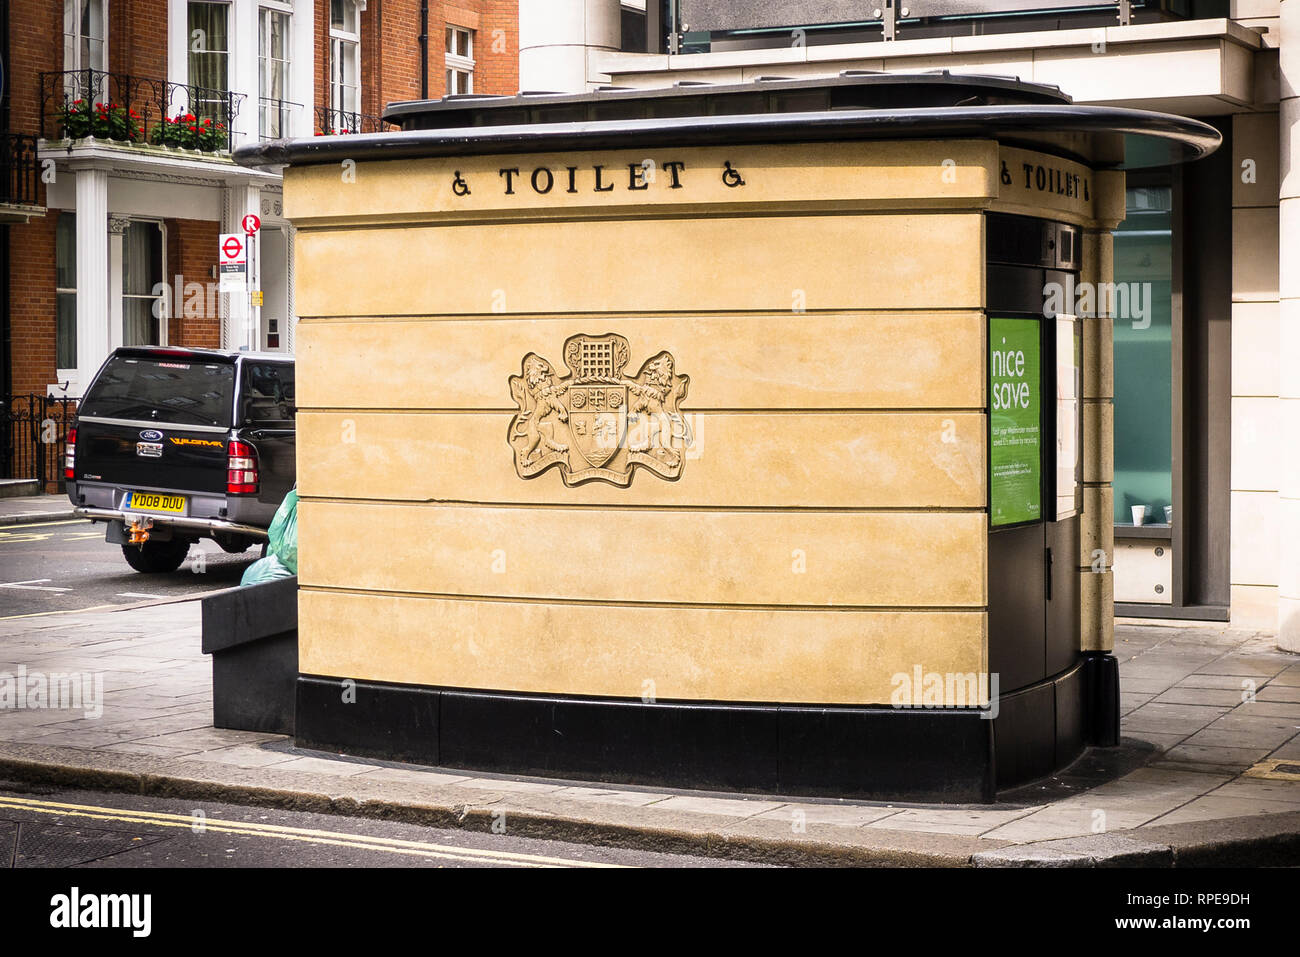 Public convenience in a London street in Central London UK Stock Photo